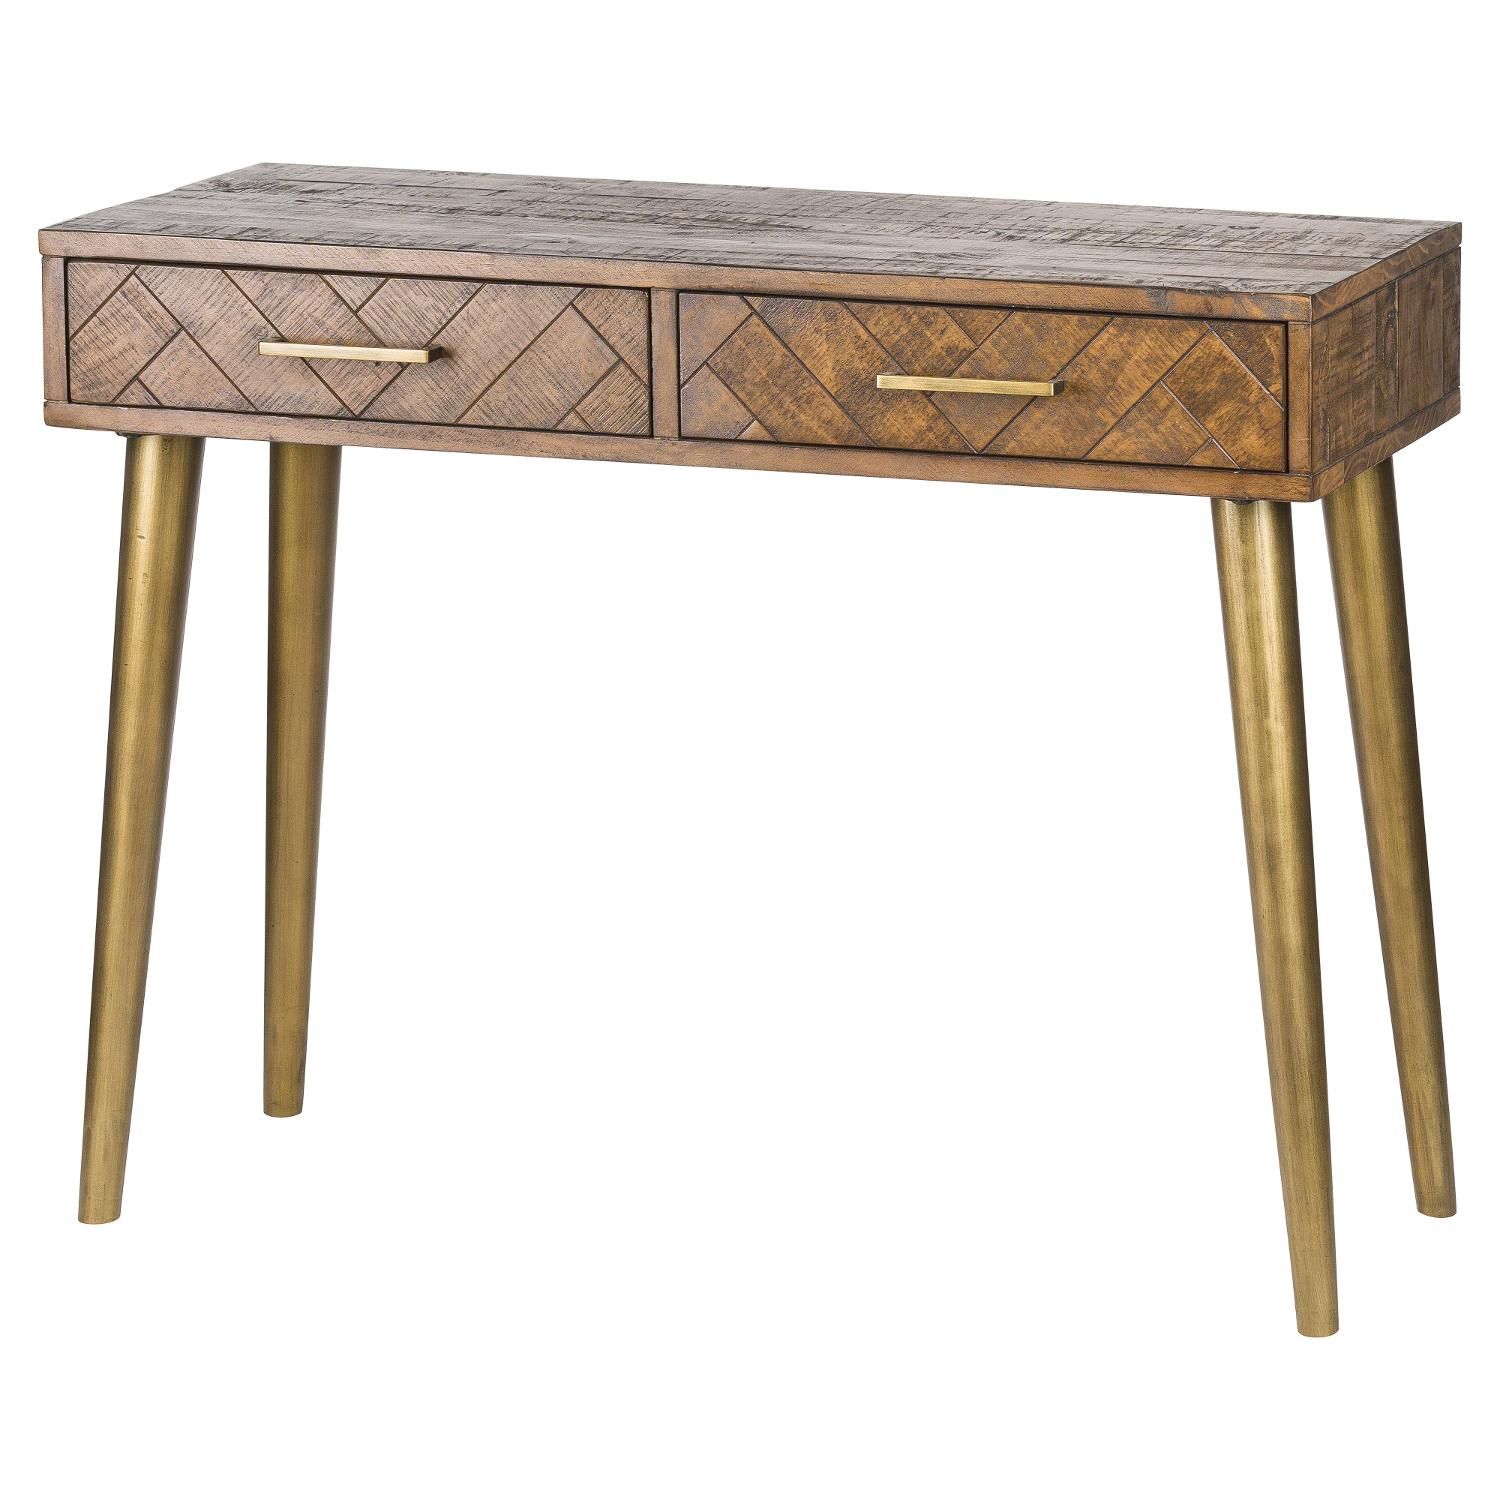 Havana Gold 2 Drawer Console Table | From Baytree Interiors Pertaining To Antiqued Gold Rectangular Console Tables (View 5 of 20)